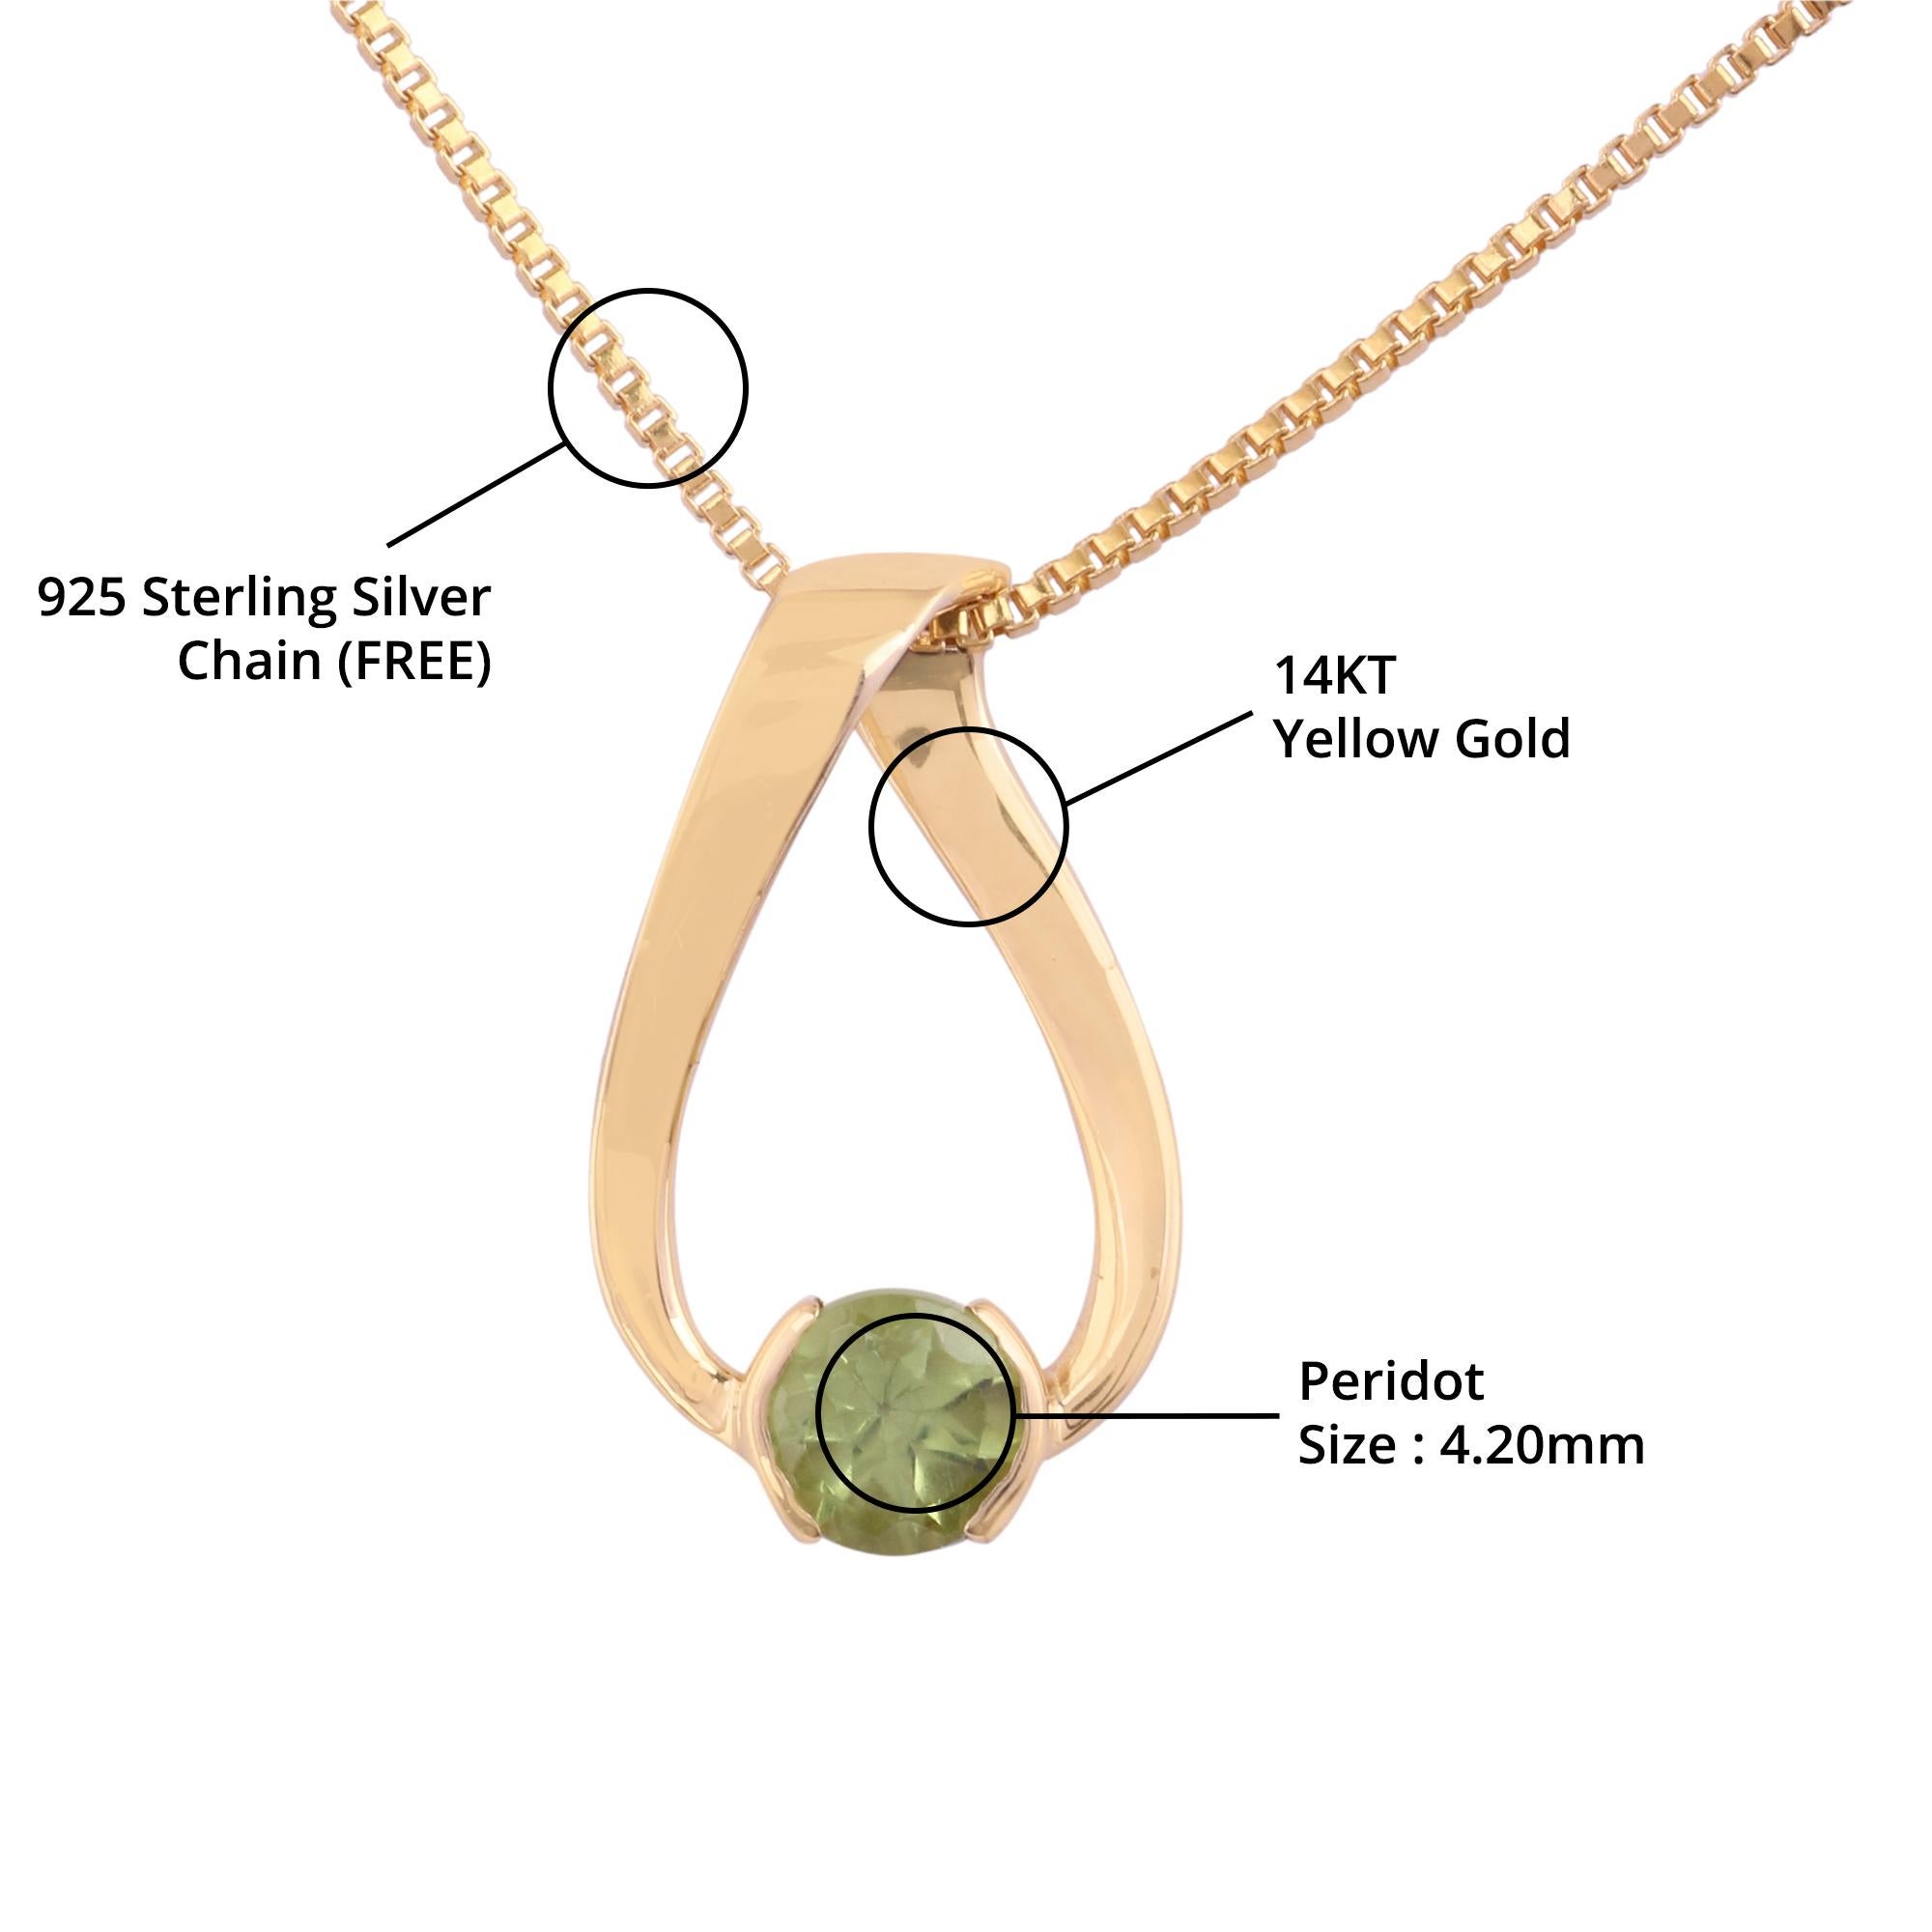 Item details:-

✦ SKU:- JPD00175YYY

✦ Material :- Gold

✦ Metal Purity : 14K Yellow Gold

✦ Gemstone Specification:- 
✧ Natural Round Peridot - 4.20mm - 1 Pc


✦ Approx. Round Natural Peridot Weight : 0.375 Carat


✦ Approx. Item Gross Weight:-